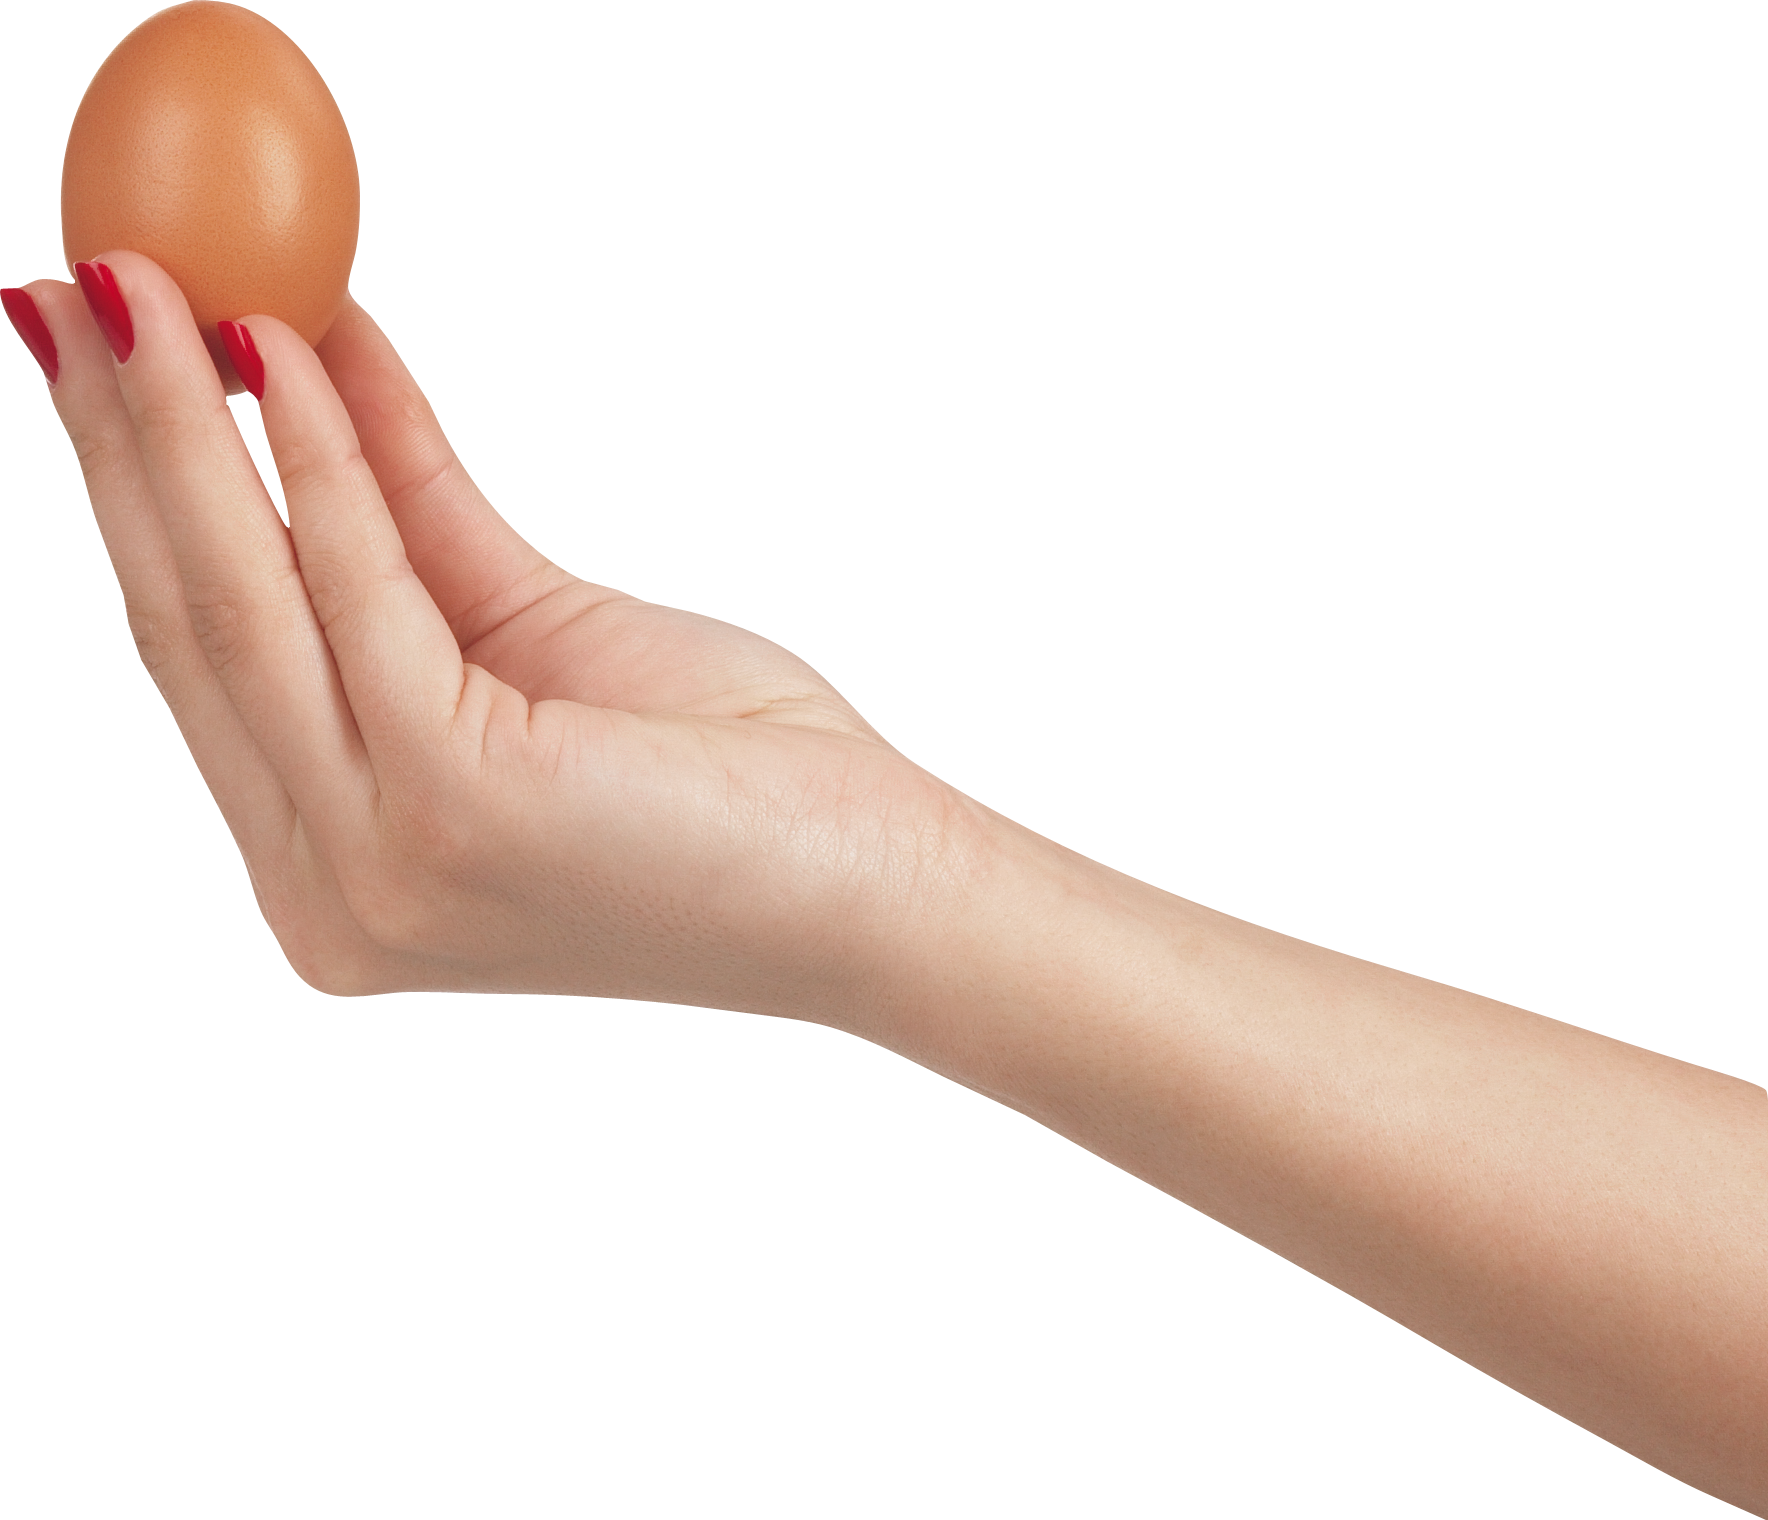 Egg in hand PNG image